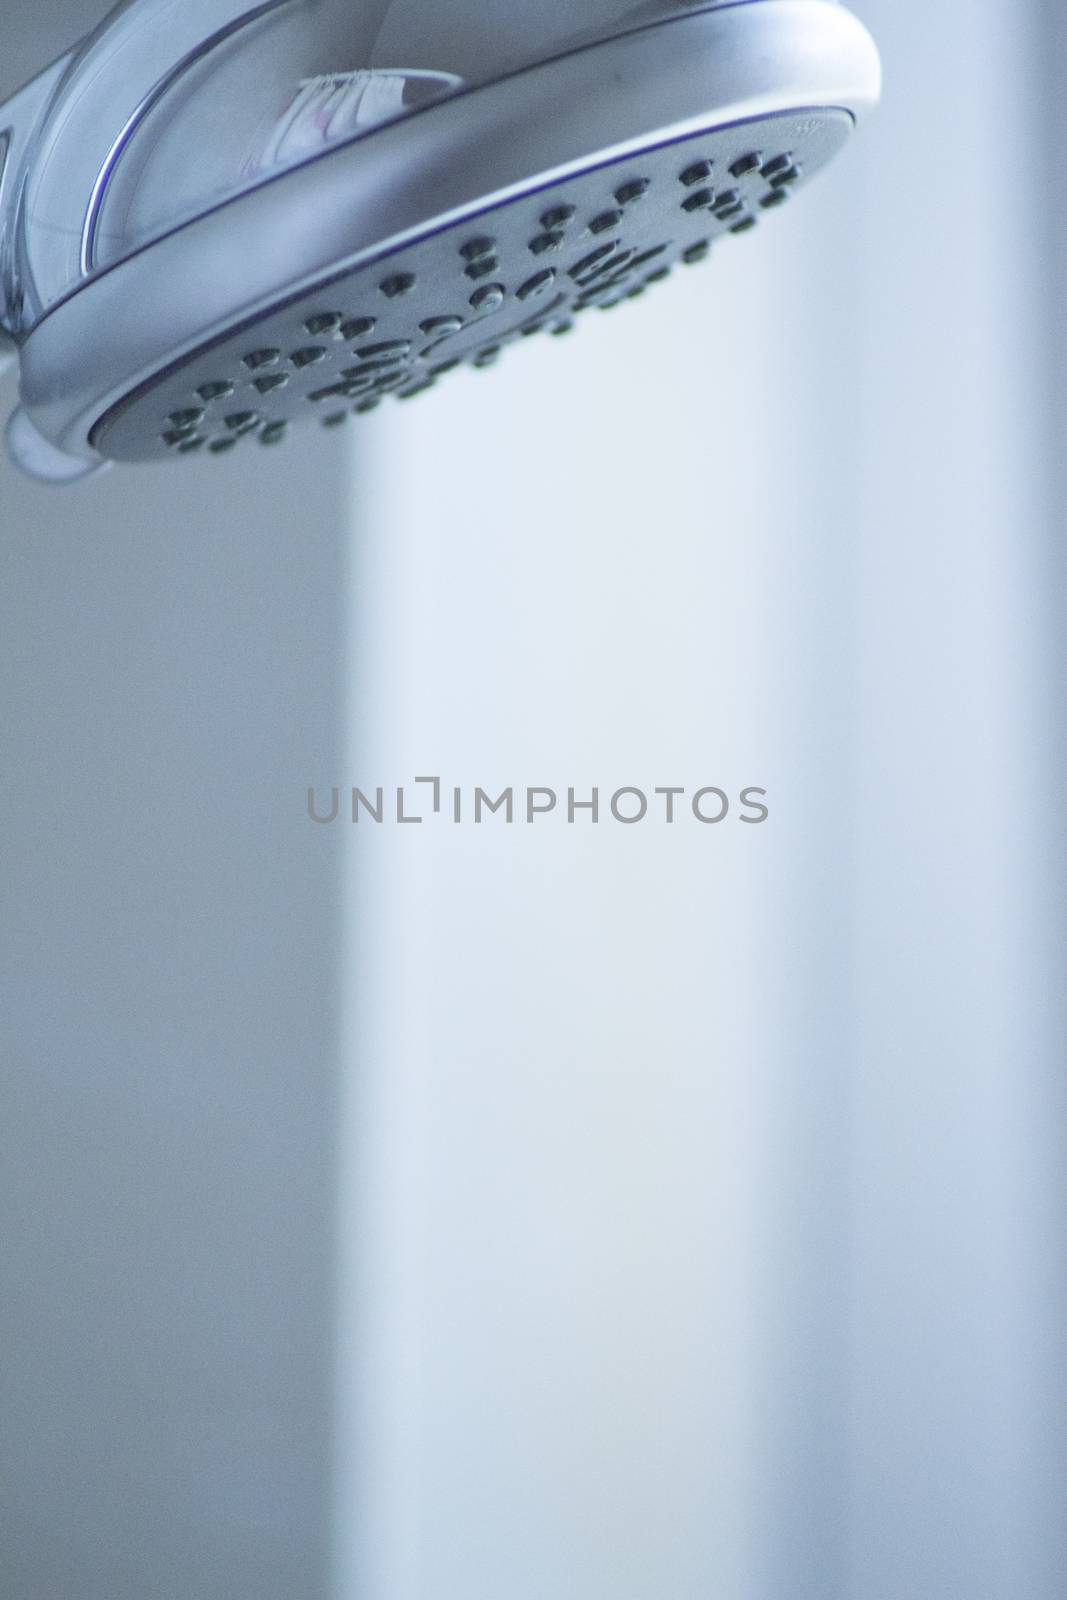 Domestic bathroom shower head close-up in blue by edwardolive